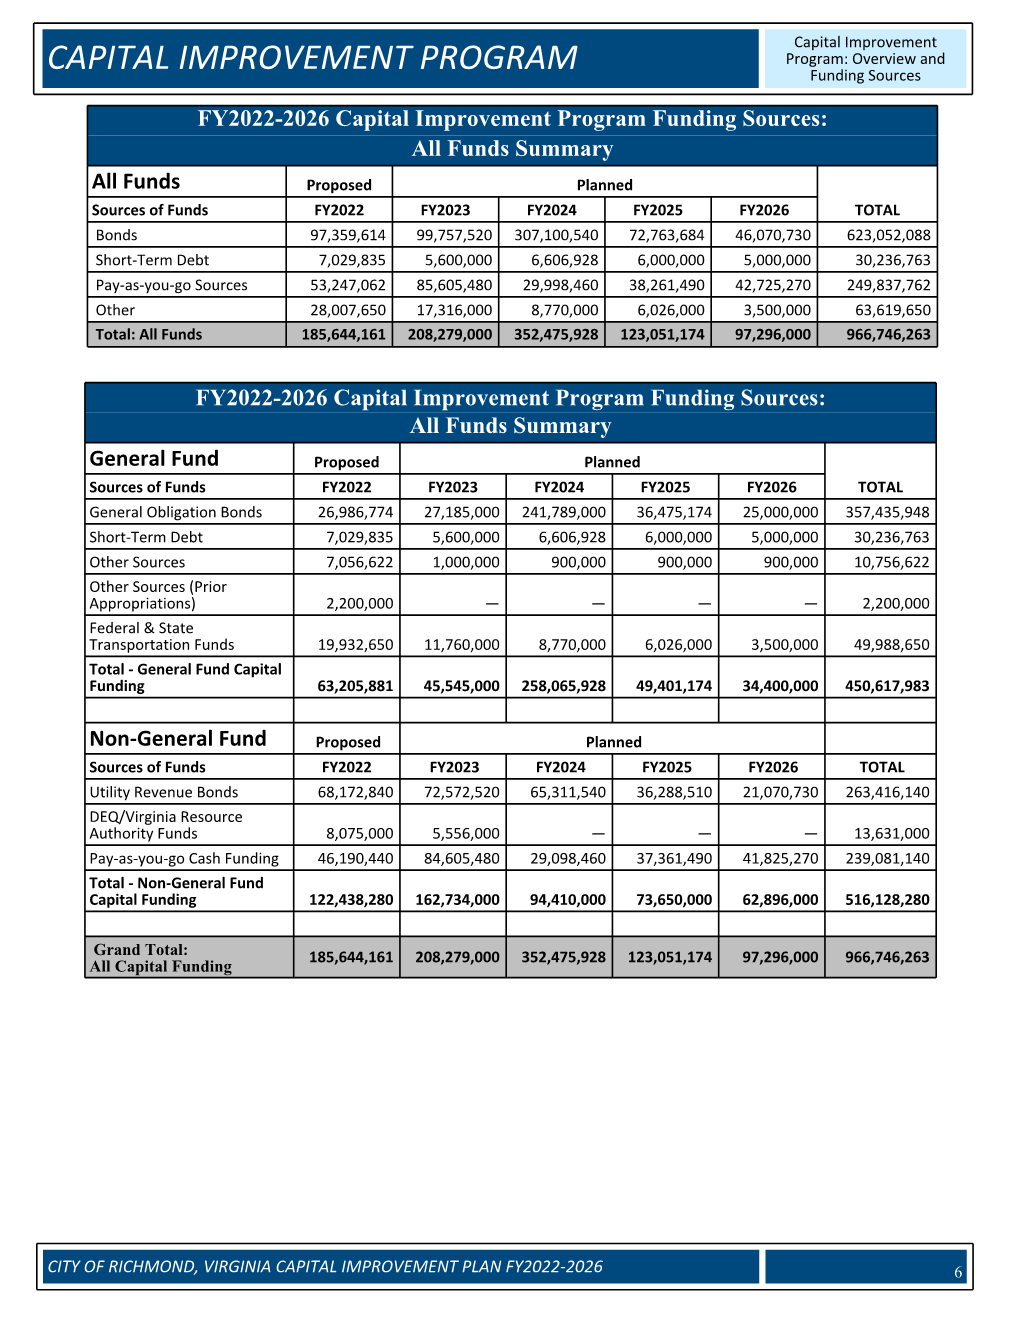 FY2022-2026 Capital Improvement Program Funding Sources: All Funds Summary